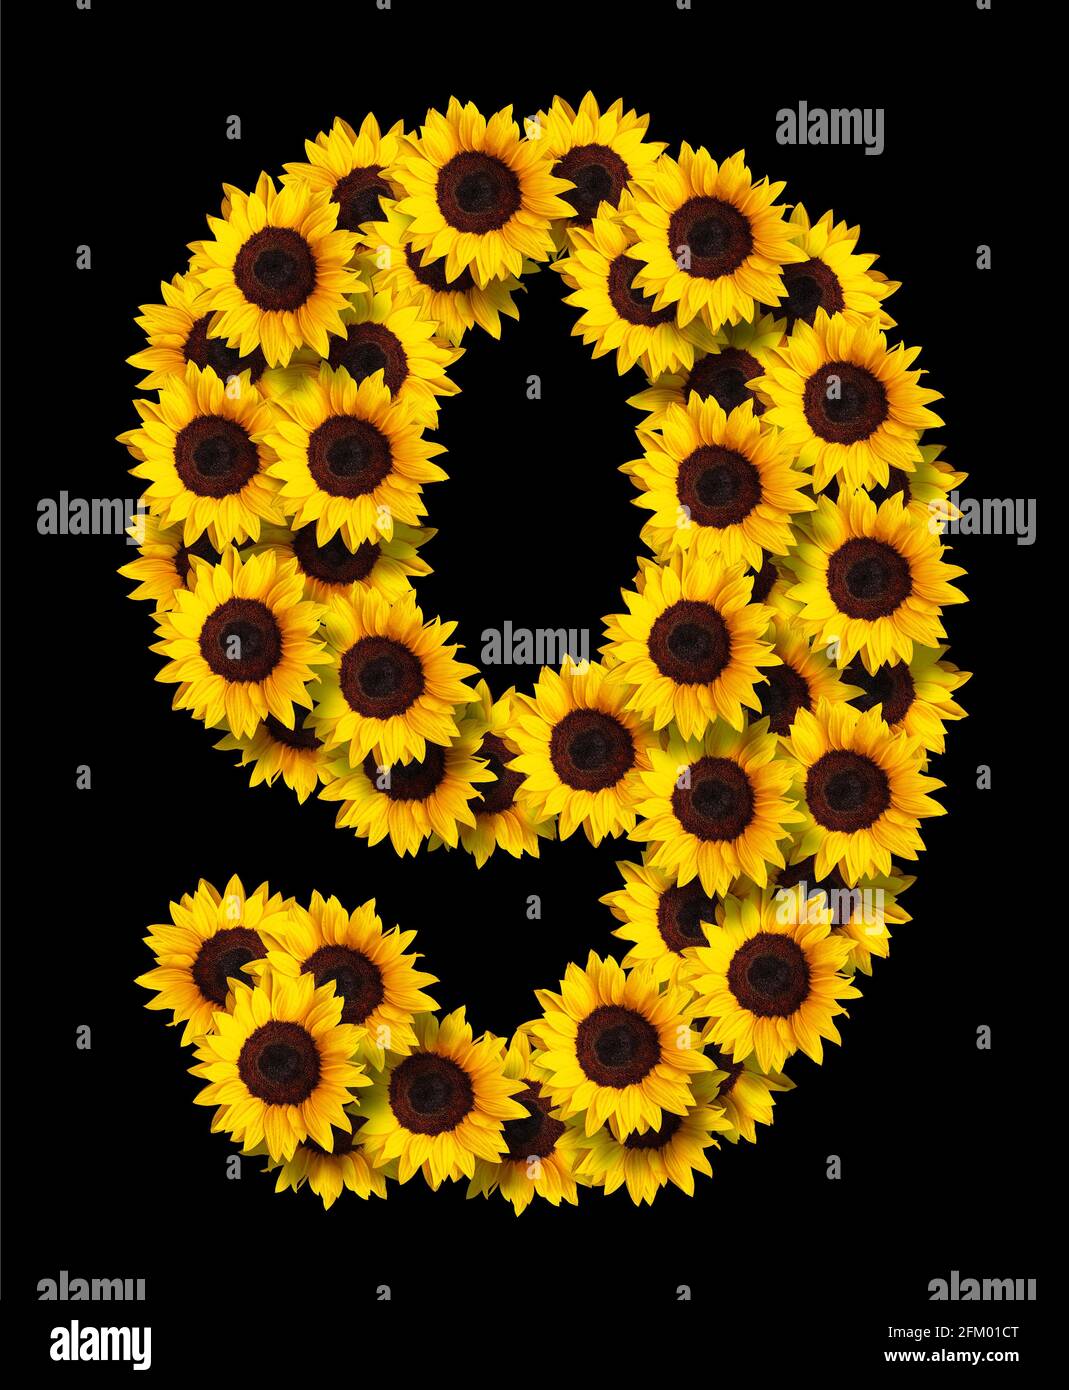 image of number 9 made of yellow sunflowers flowers isolated on black background. Design element for love concepts designs. Ideal for mothers day and Stock Photo